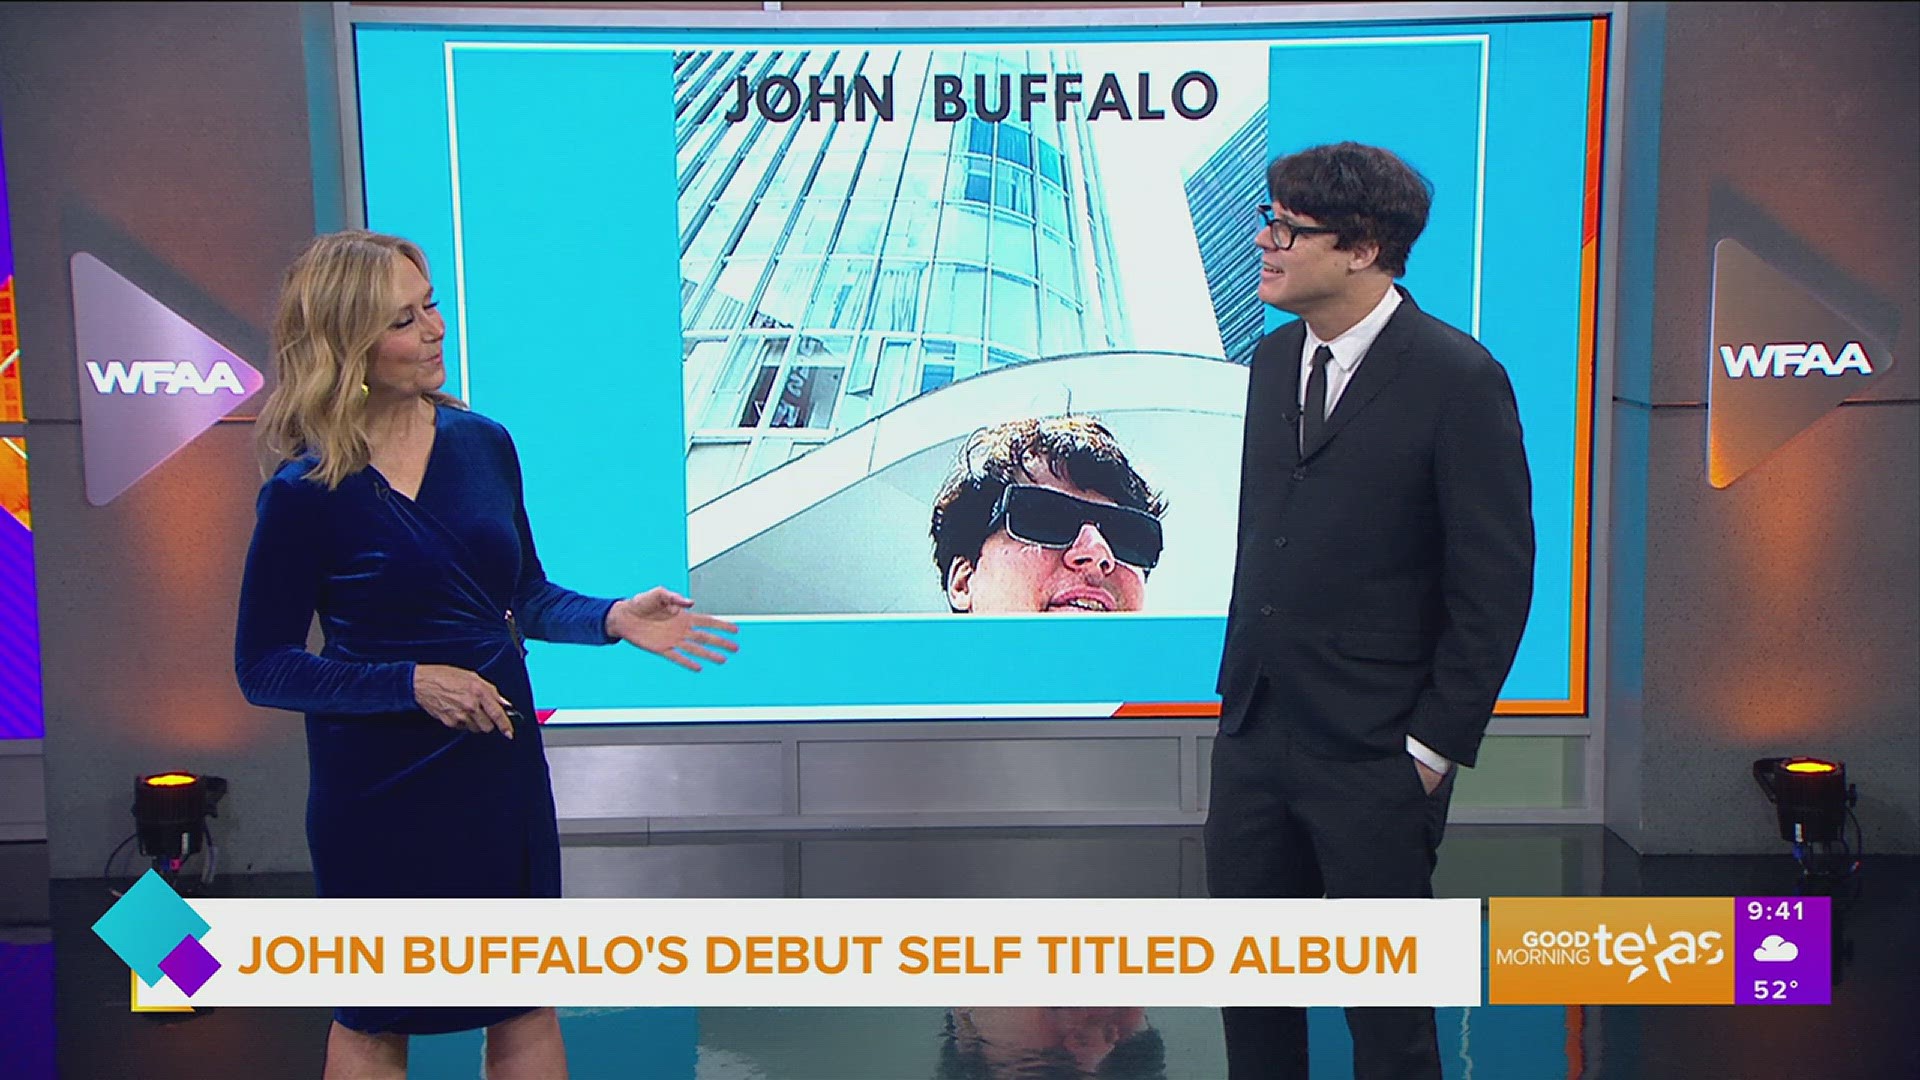 Dallas Musician John Buffalo talks about releasing his debut self titled album after near death experience and help from Stephen King